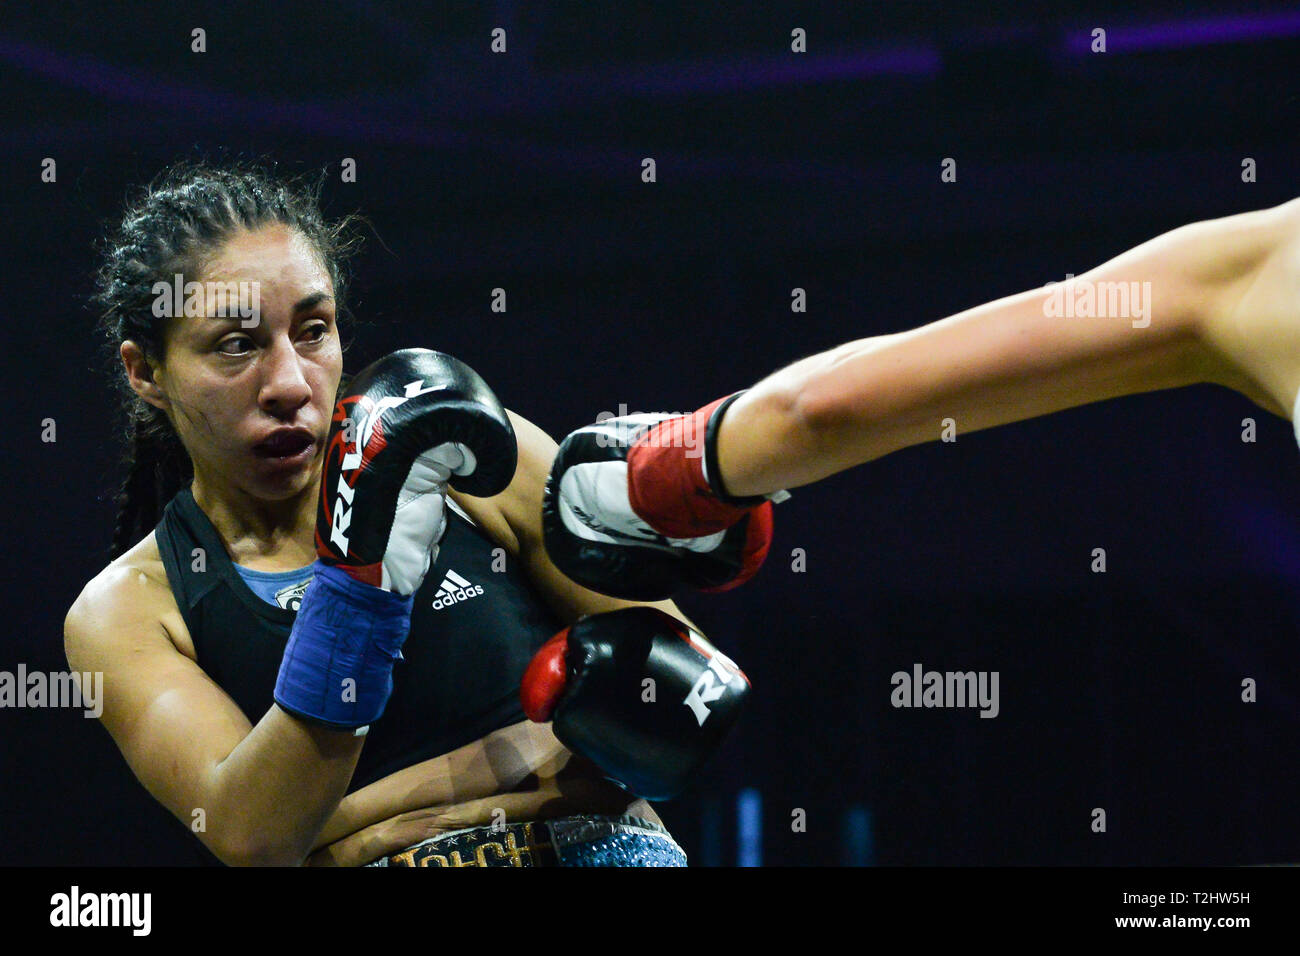 TORONTO, ON - MARCH 29, 2019: Giselle "La Tigresa" Luna (L) from Argentina  punches Tanja Ovsenik (R) from Canada during the TAKEOVER boxing event pres  Stock Photo - Alamy